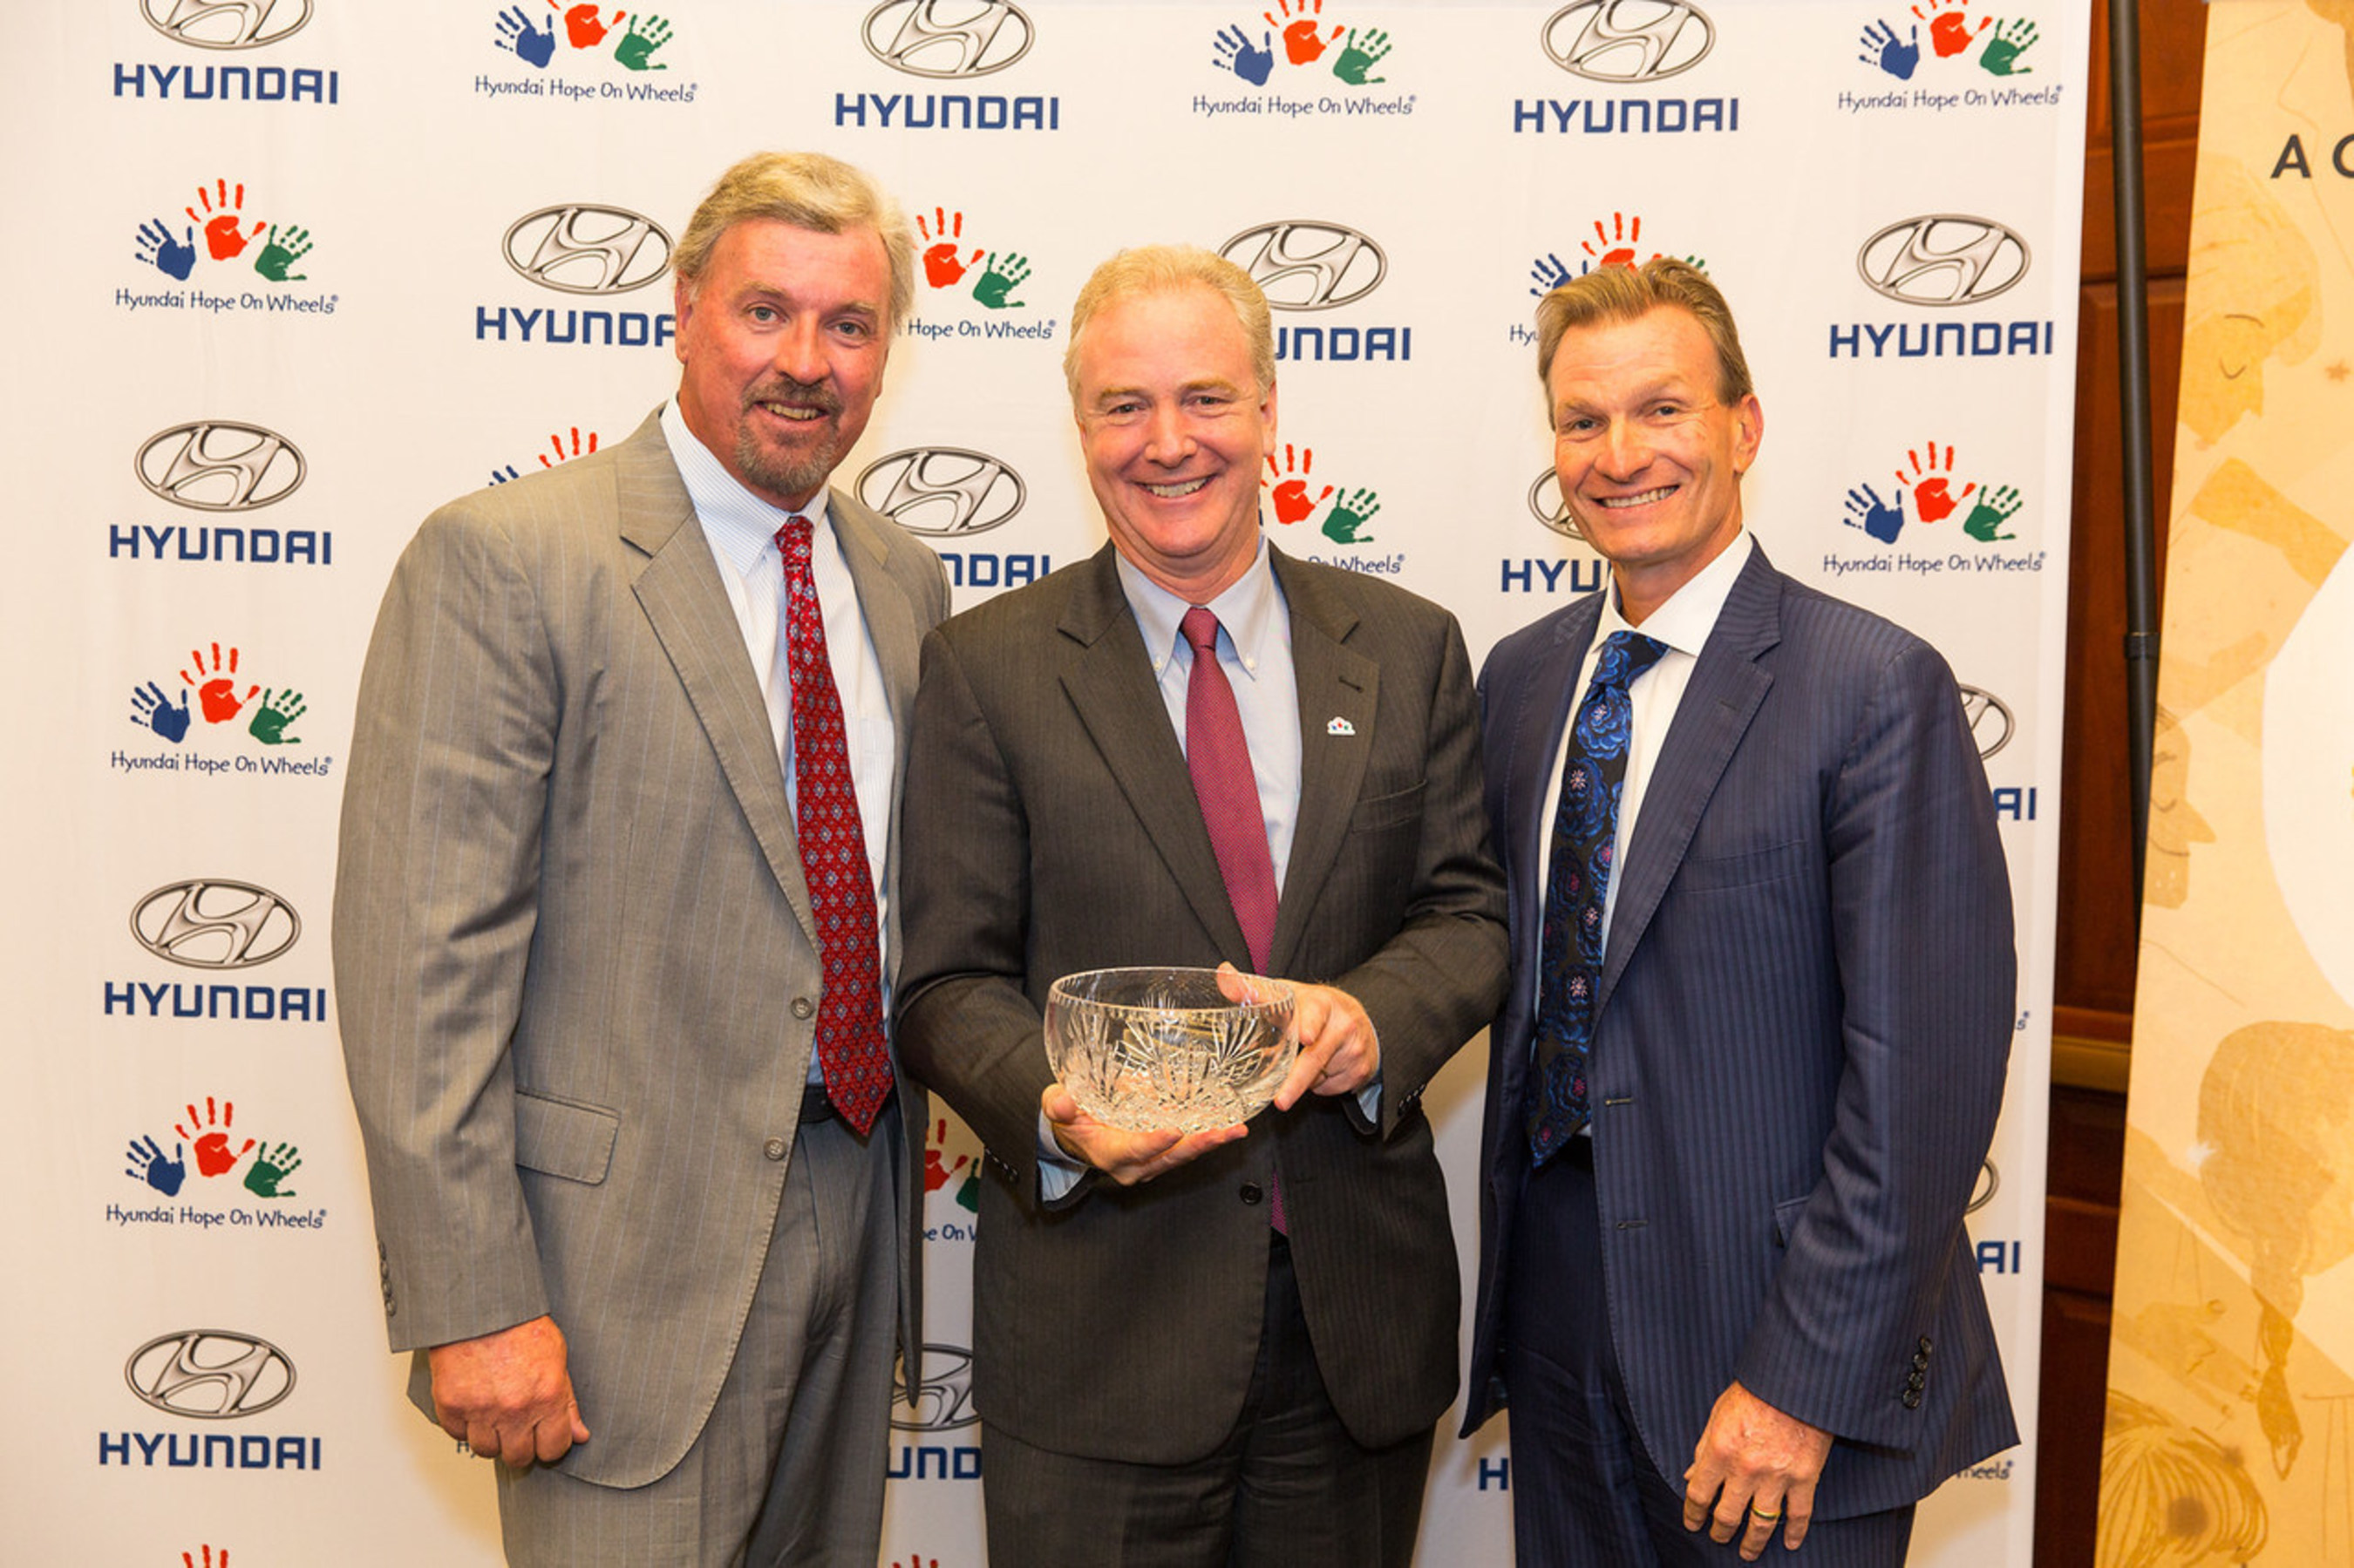 Representative Chris Van Hollen (MD) Poses with Hyundai Motor America President and CEO Dave Zuchowski and Hyundai Hope On Wheels Vice Chairman Scott Fink After Accepting the Hero of Hope Award